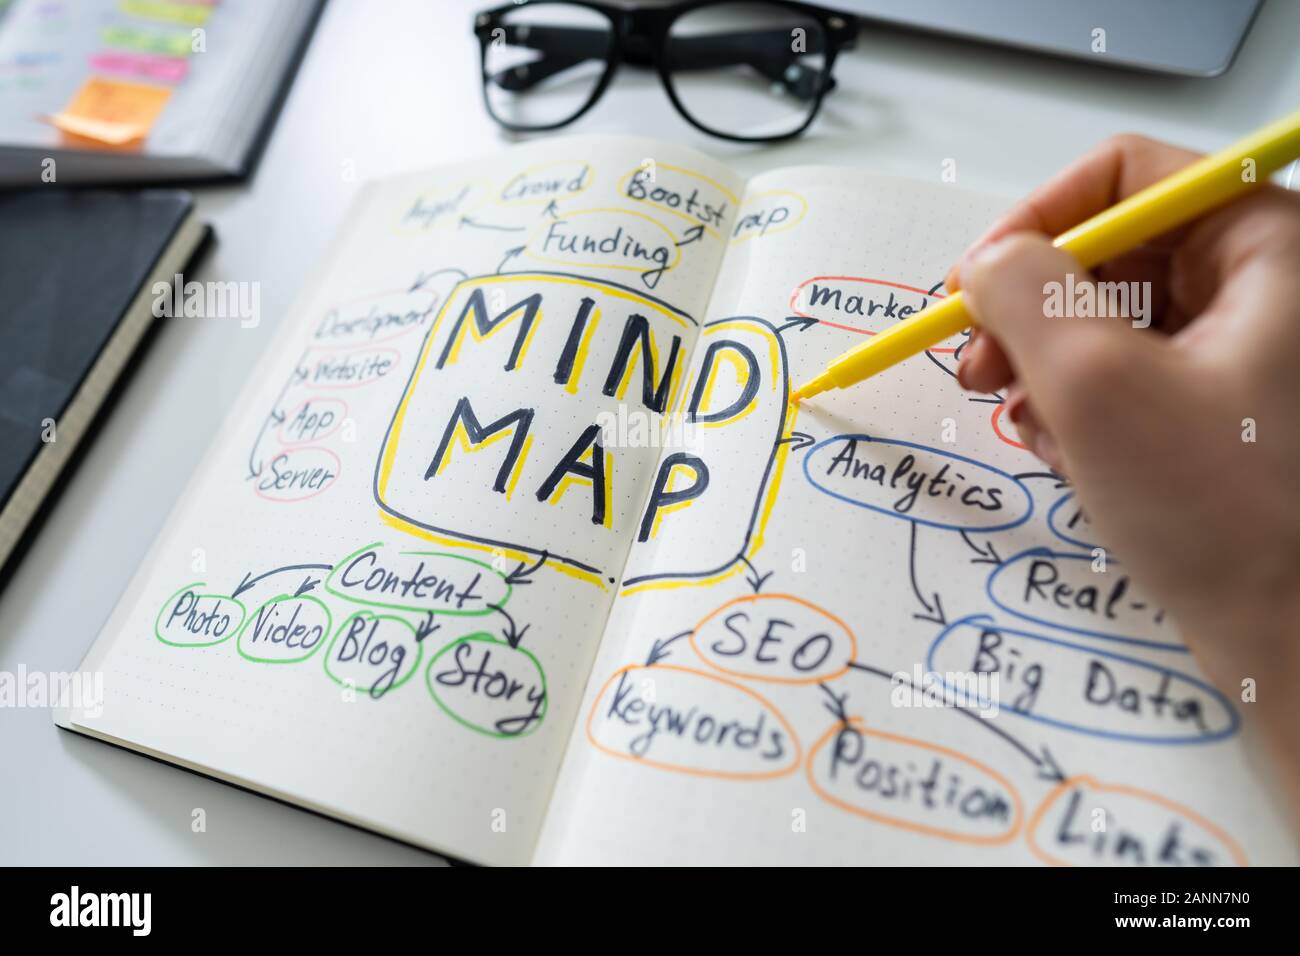 Elevated View Of A Human Hand With Mind Map Concept On Notebook Stock Photo